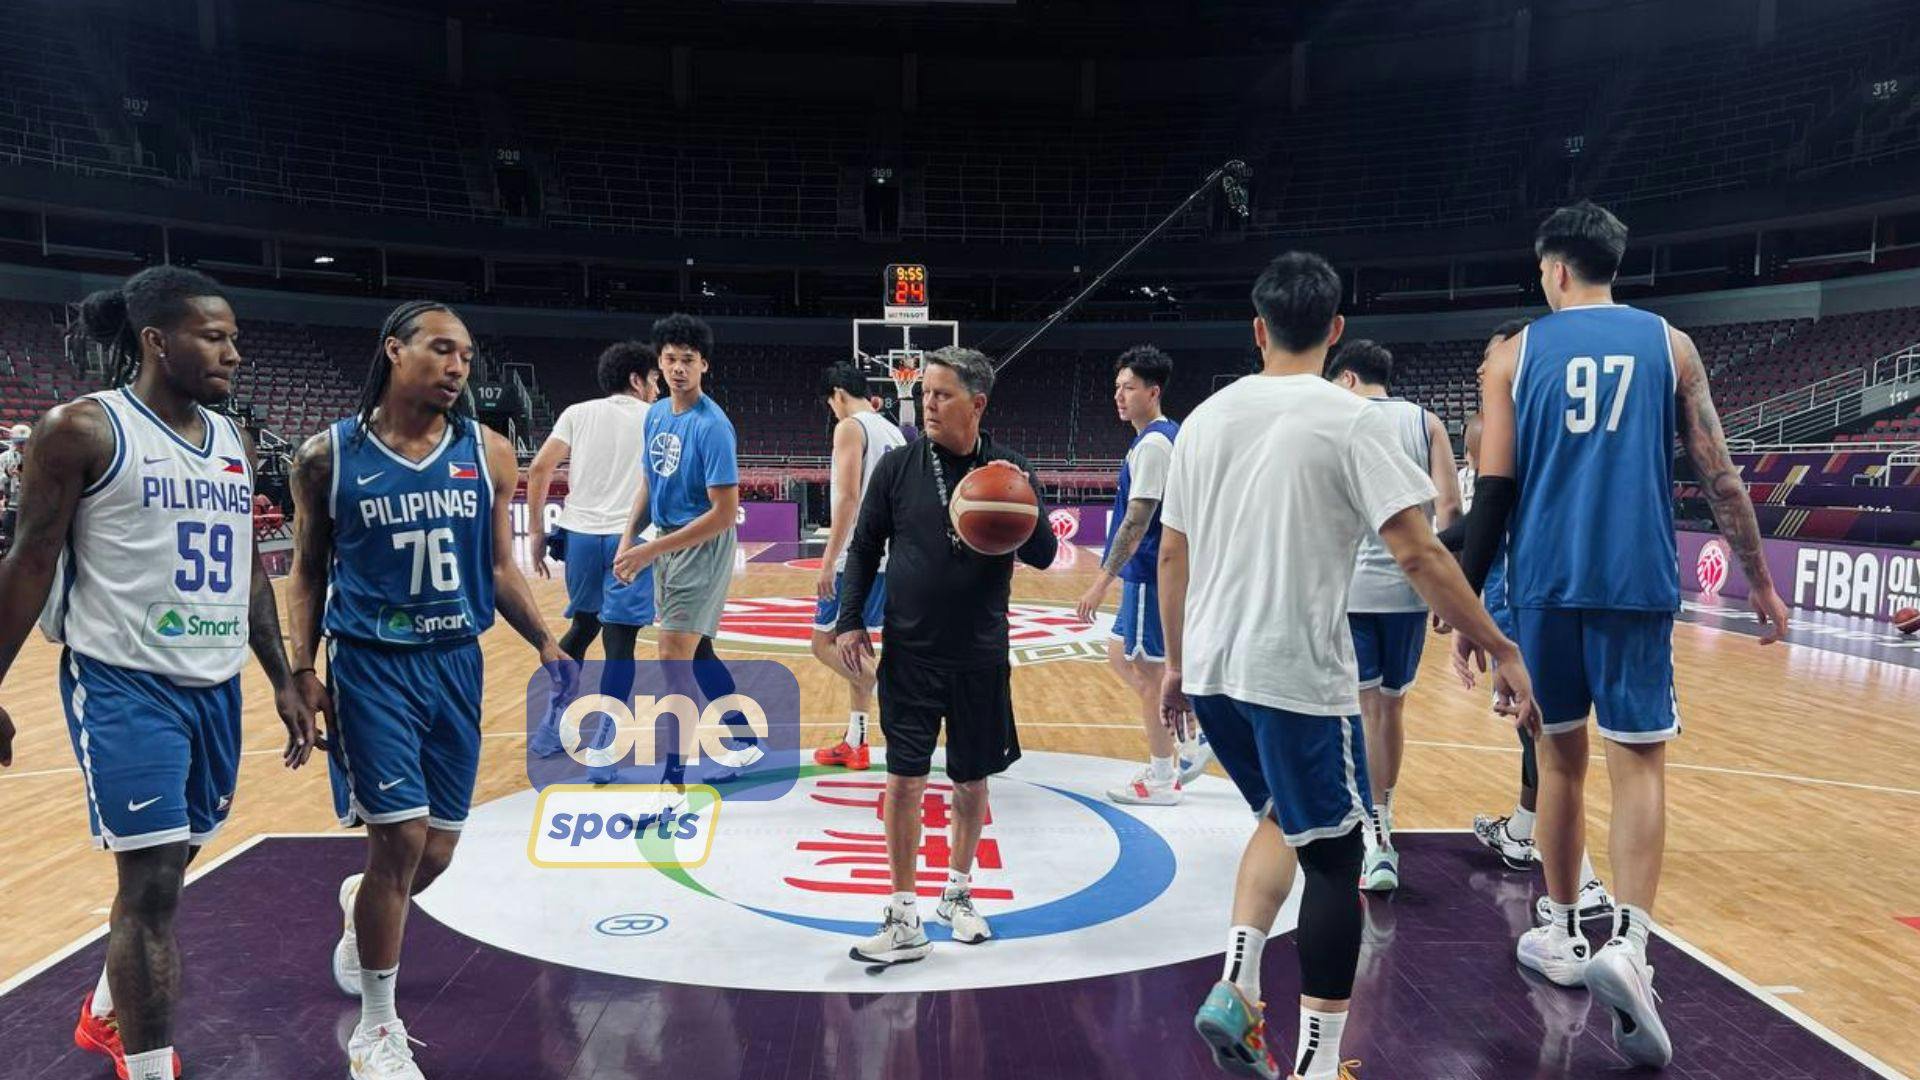 Tim Cone gives honest assessment of Gilas Pilipinas ahead of FIBA OQT match against Latvia